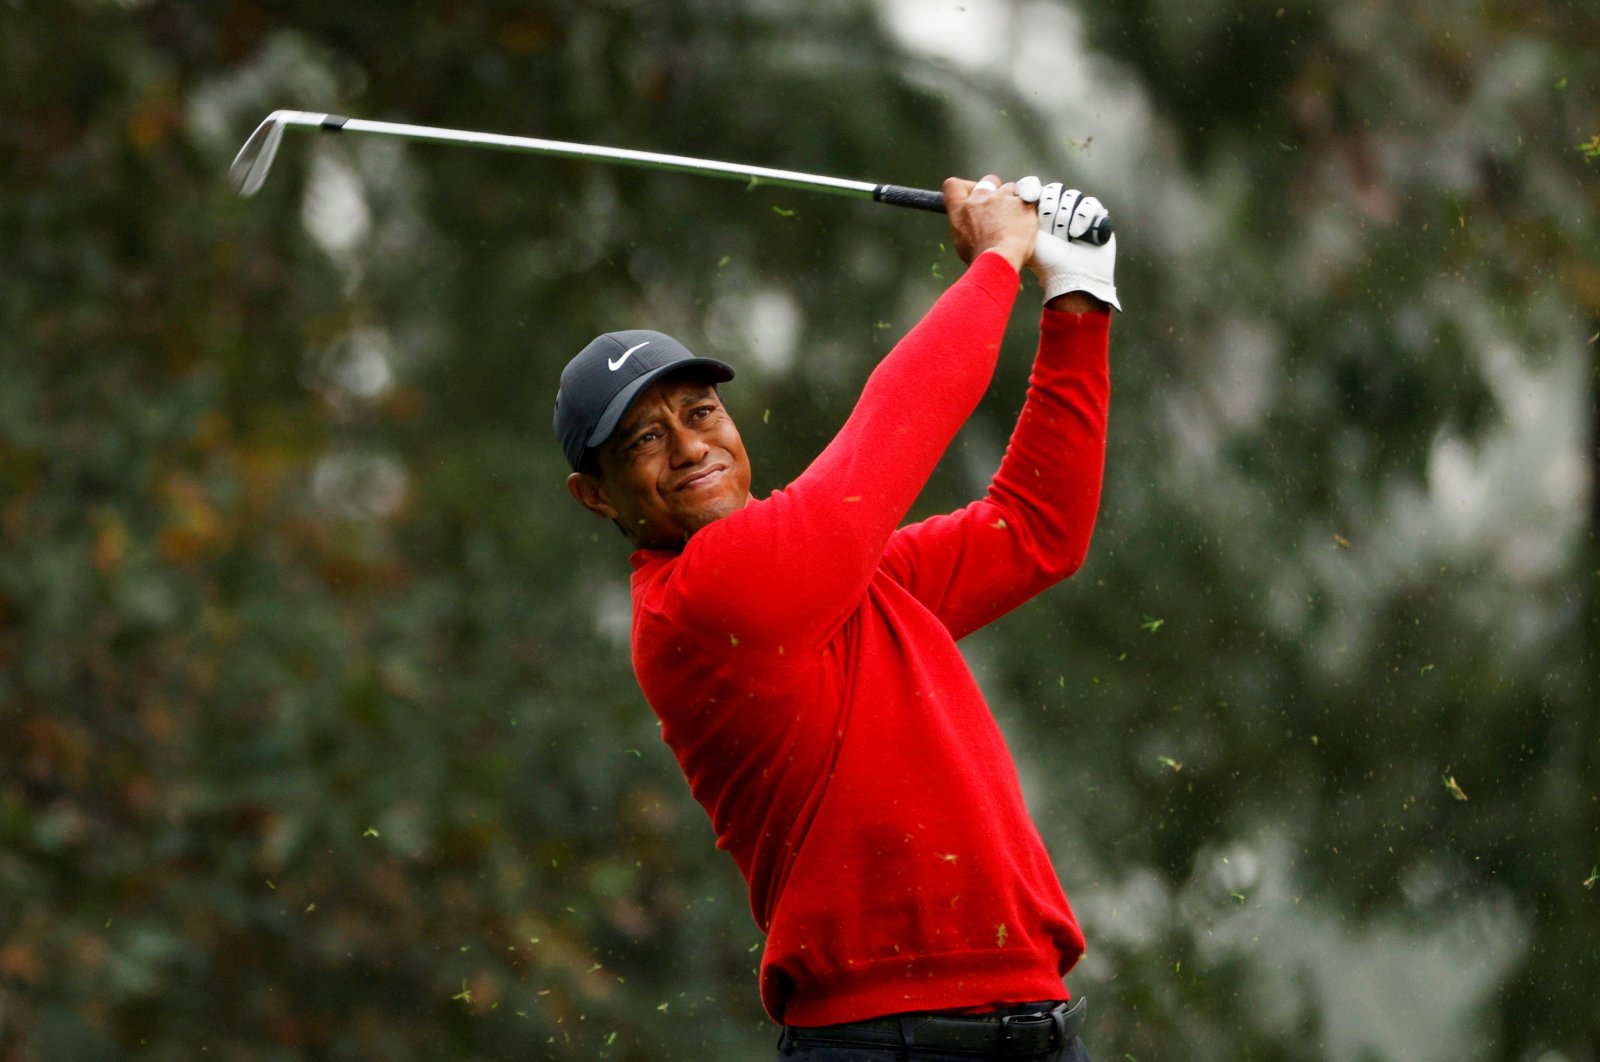 Tiger Woods of the U.S. on the 4th hole during the final round, Nov. 15, 2020, Georgia, U.S. (Reuters Photo)